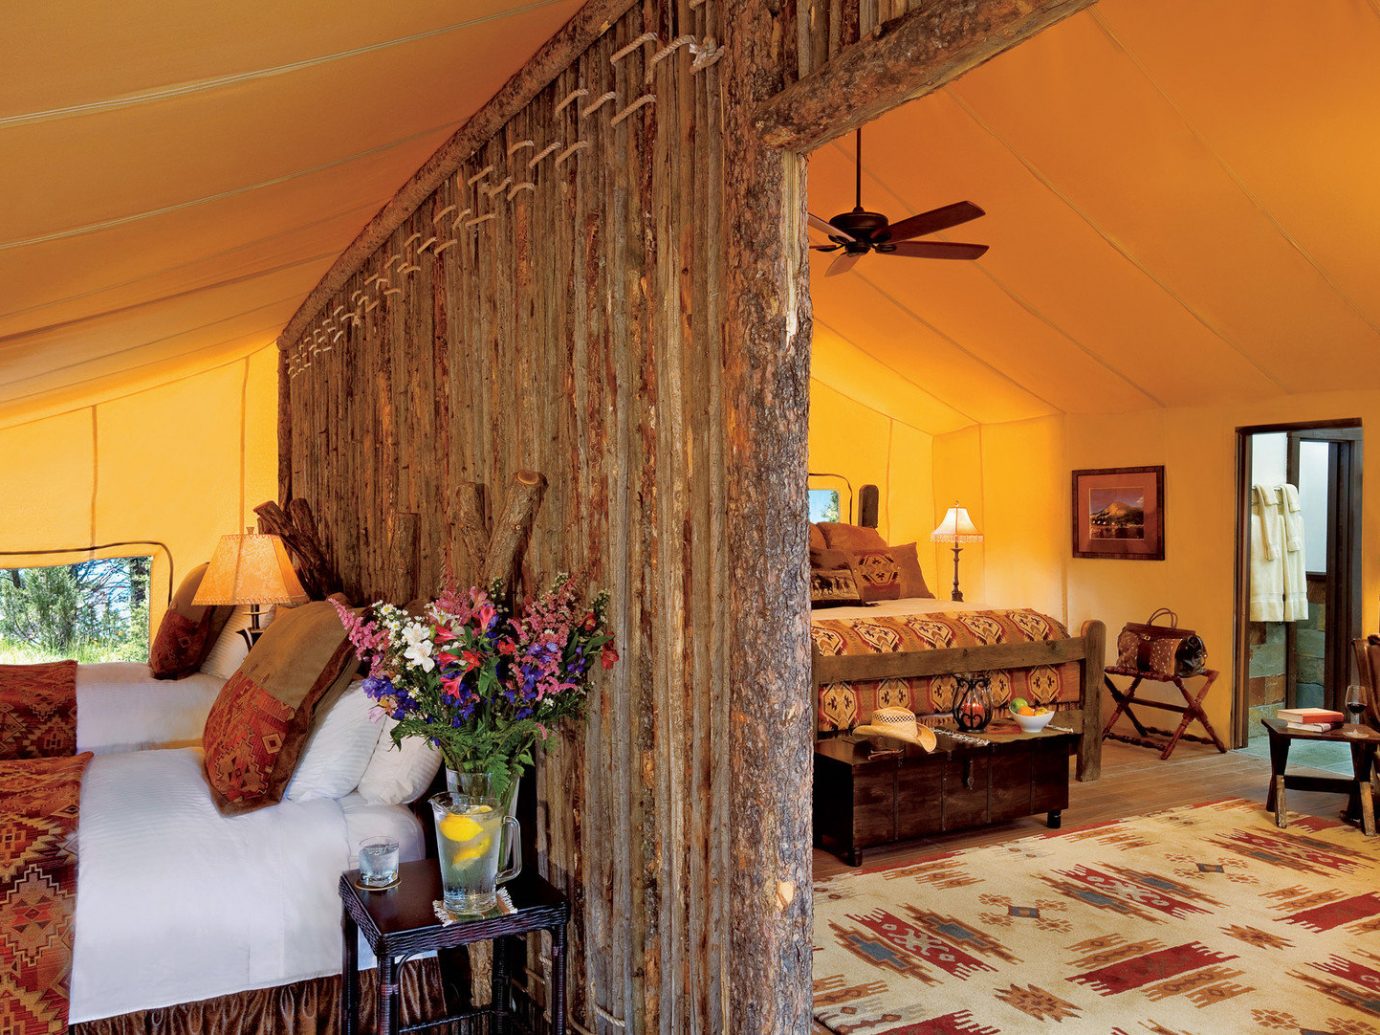 Glamping Hotels Luxury Travel Montana Outdoors + Adventure Trip Ideas indoor Living room wall floor sofa property ceiling estate furniture house living room cottage Villa home farmhouse decorated interior design real estate Bedroom mansion Suite